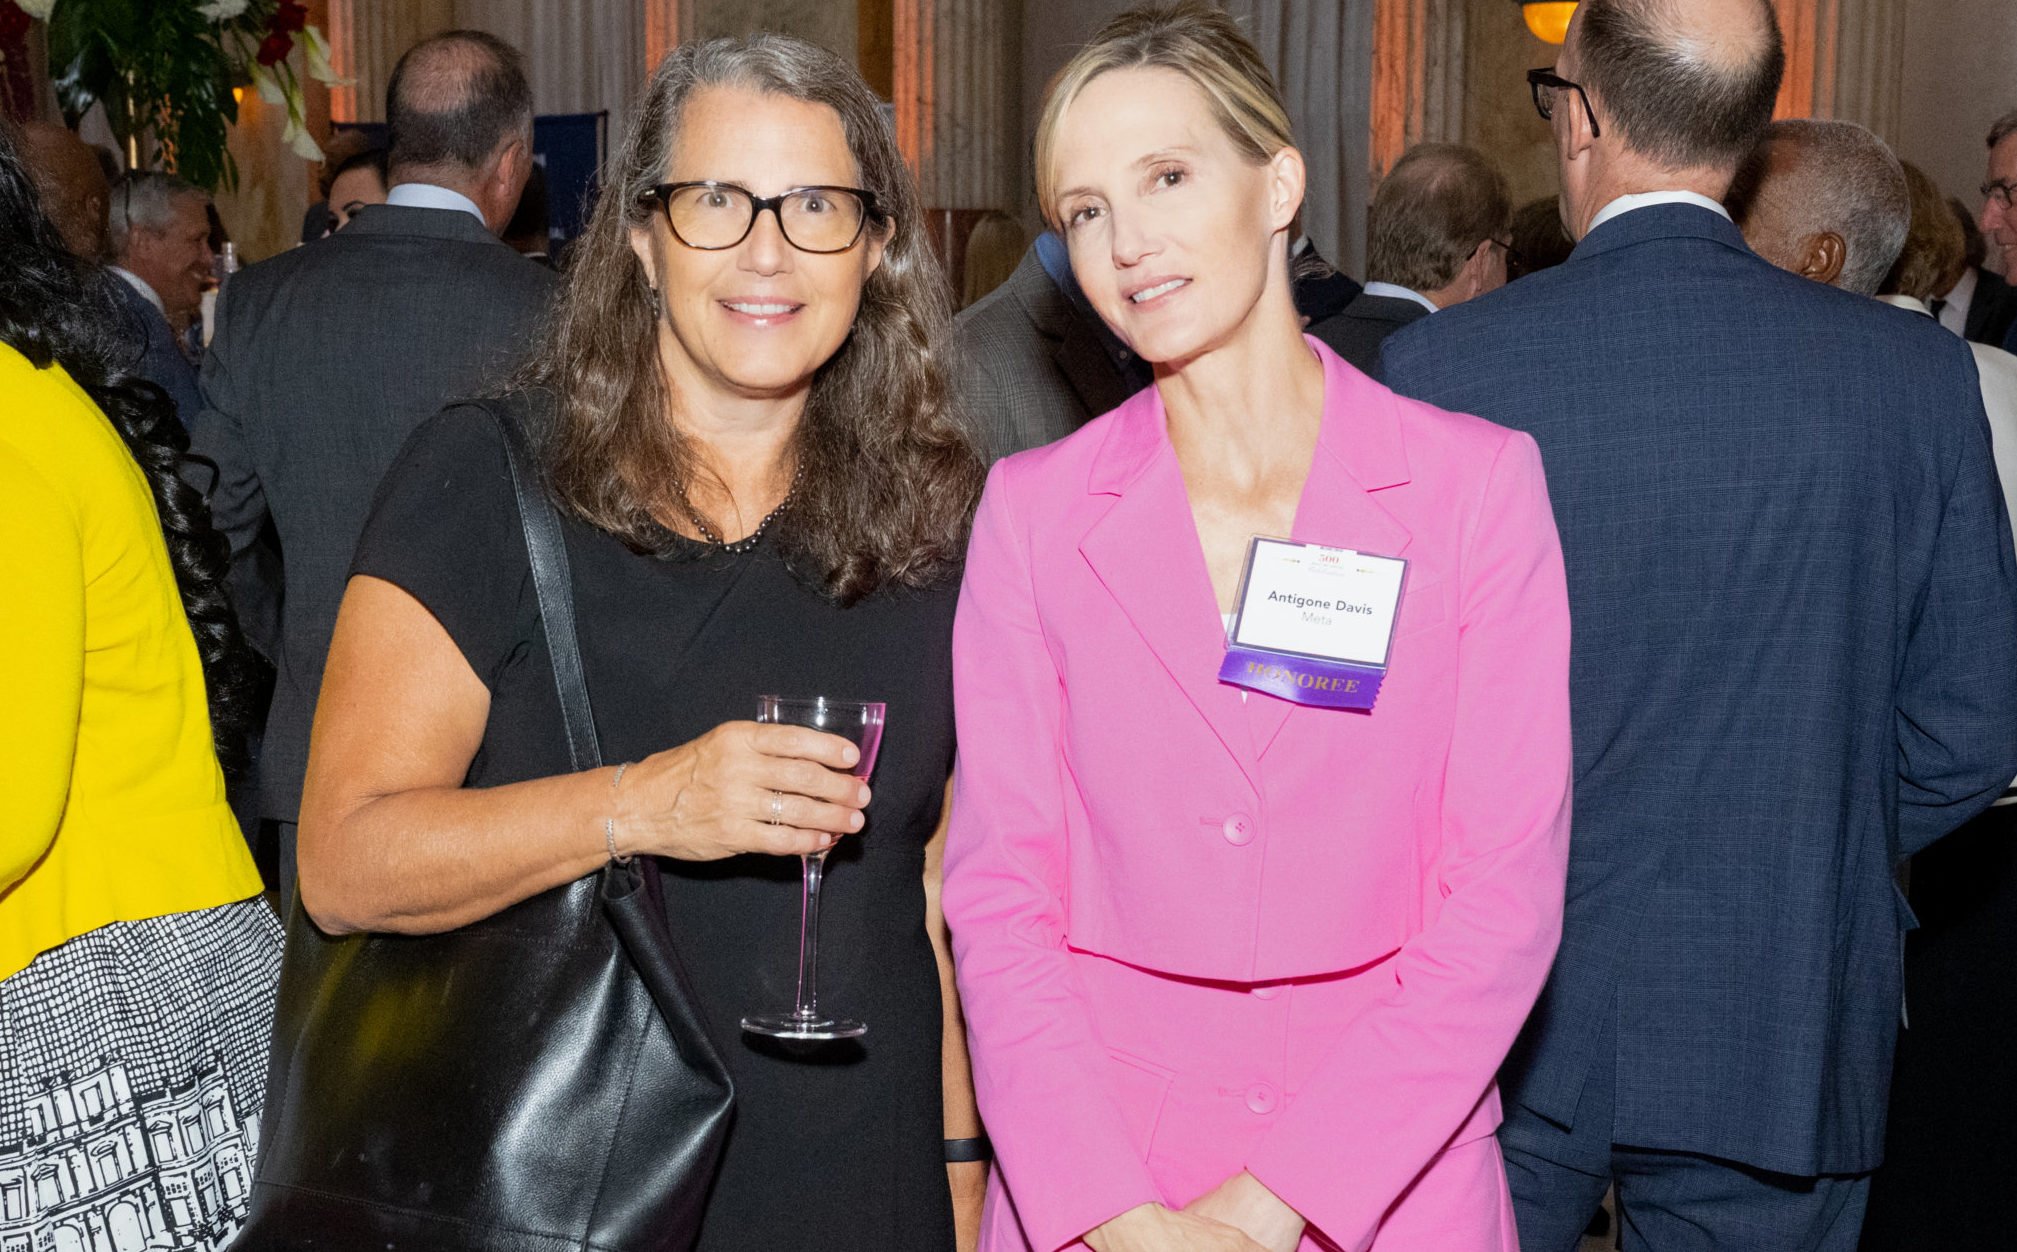 Cynthia Terell and Antigone Davis at The Washingtonian's 500 Most Influential People Celebration